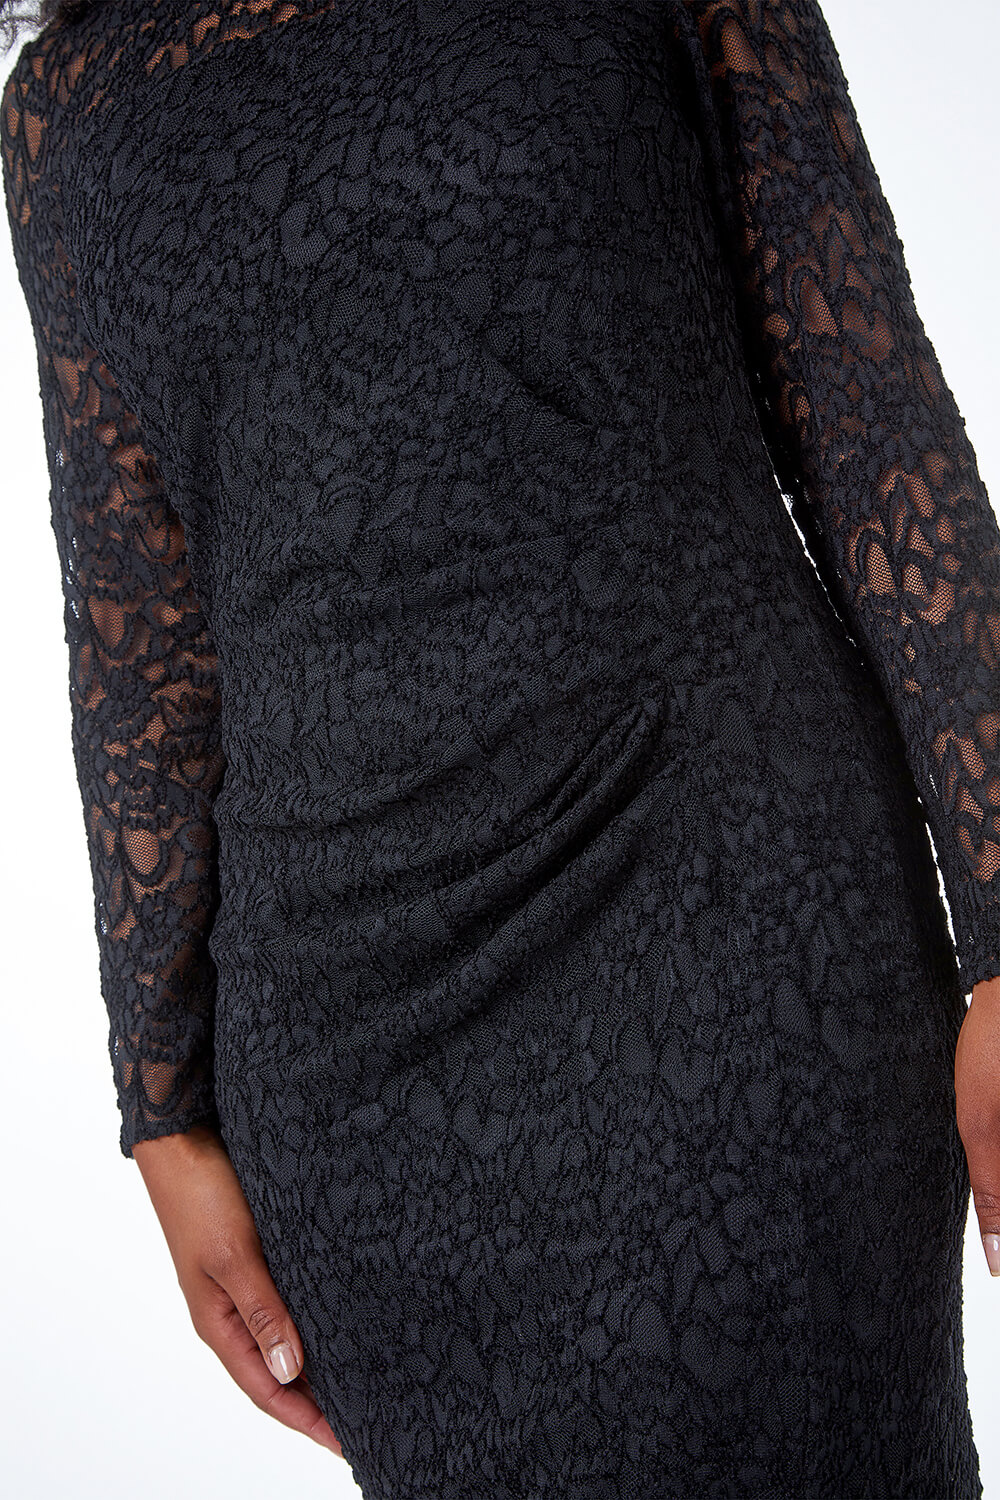 Black Petite Side Ruched Lace Dress, Image 5 of 5